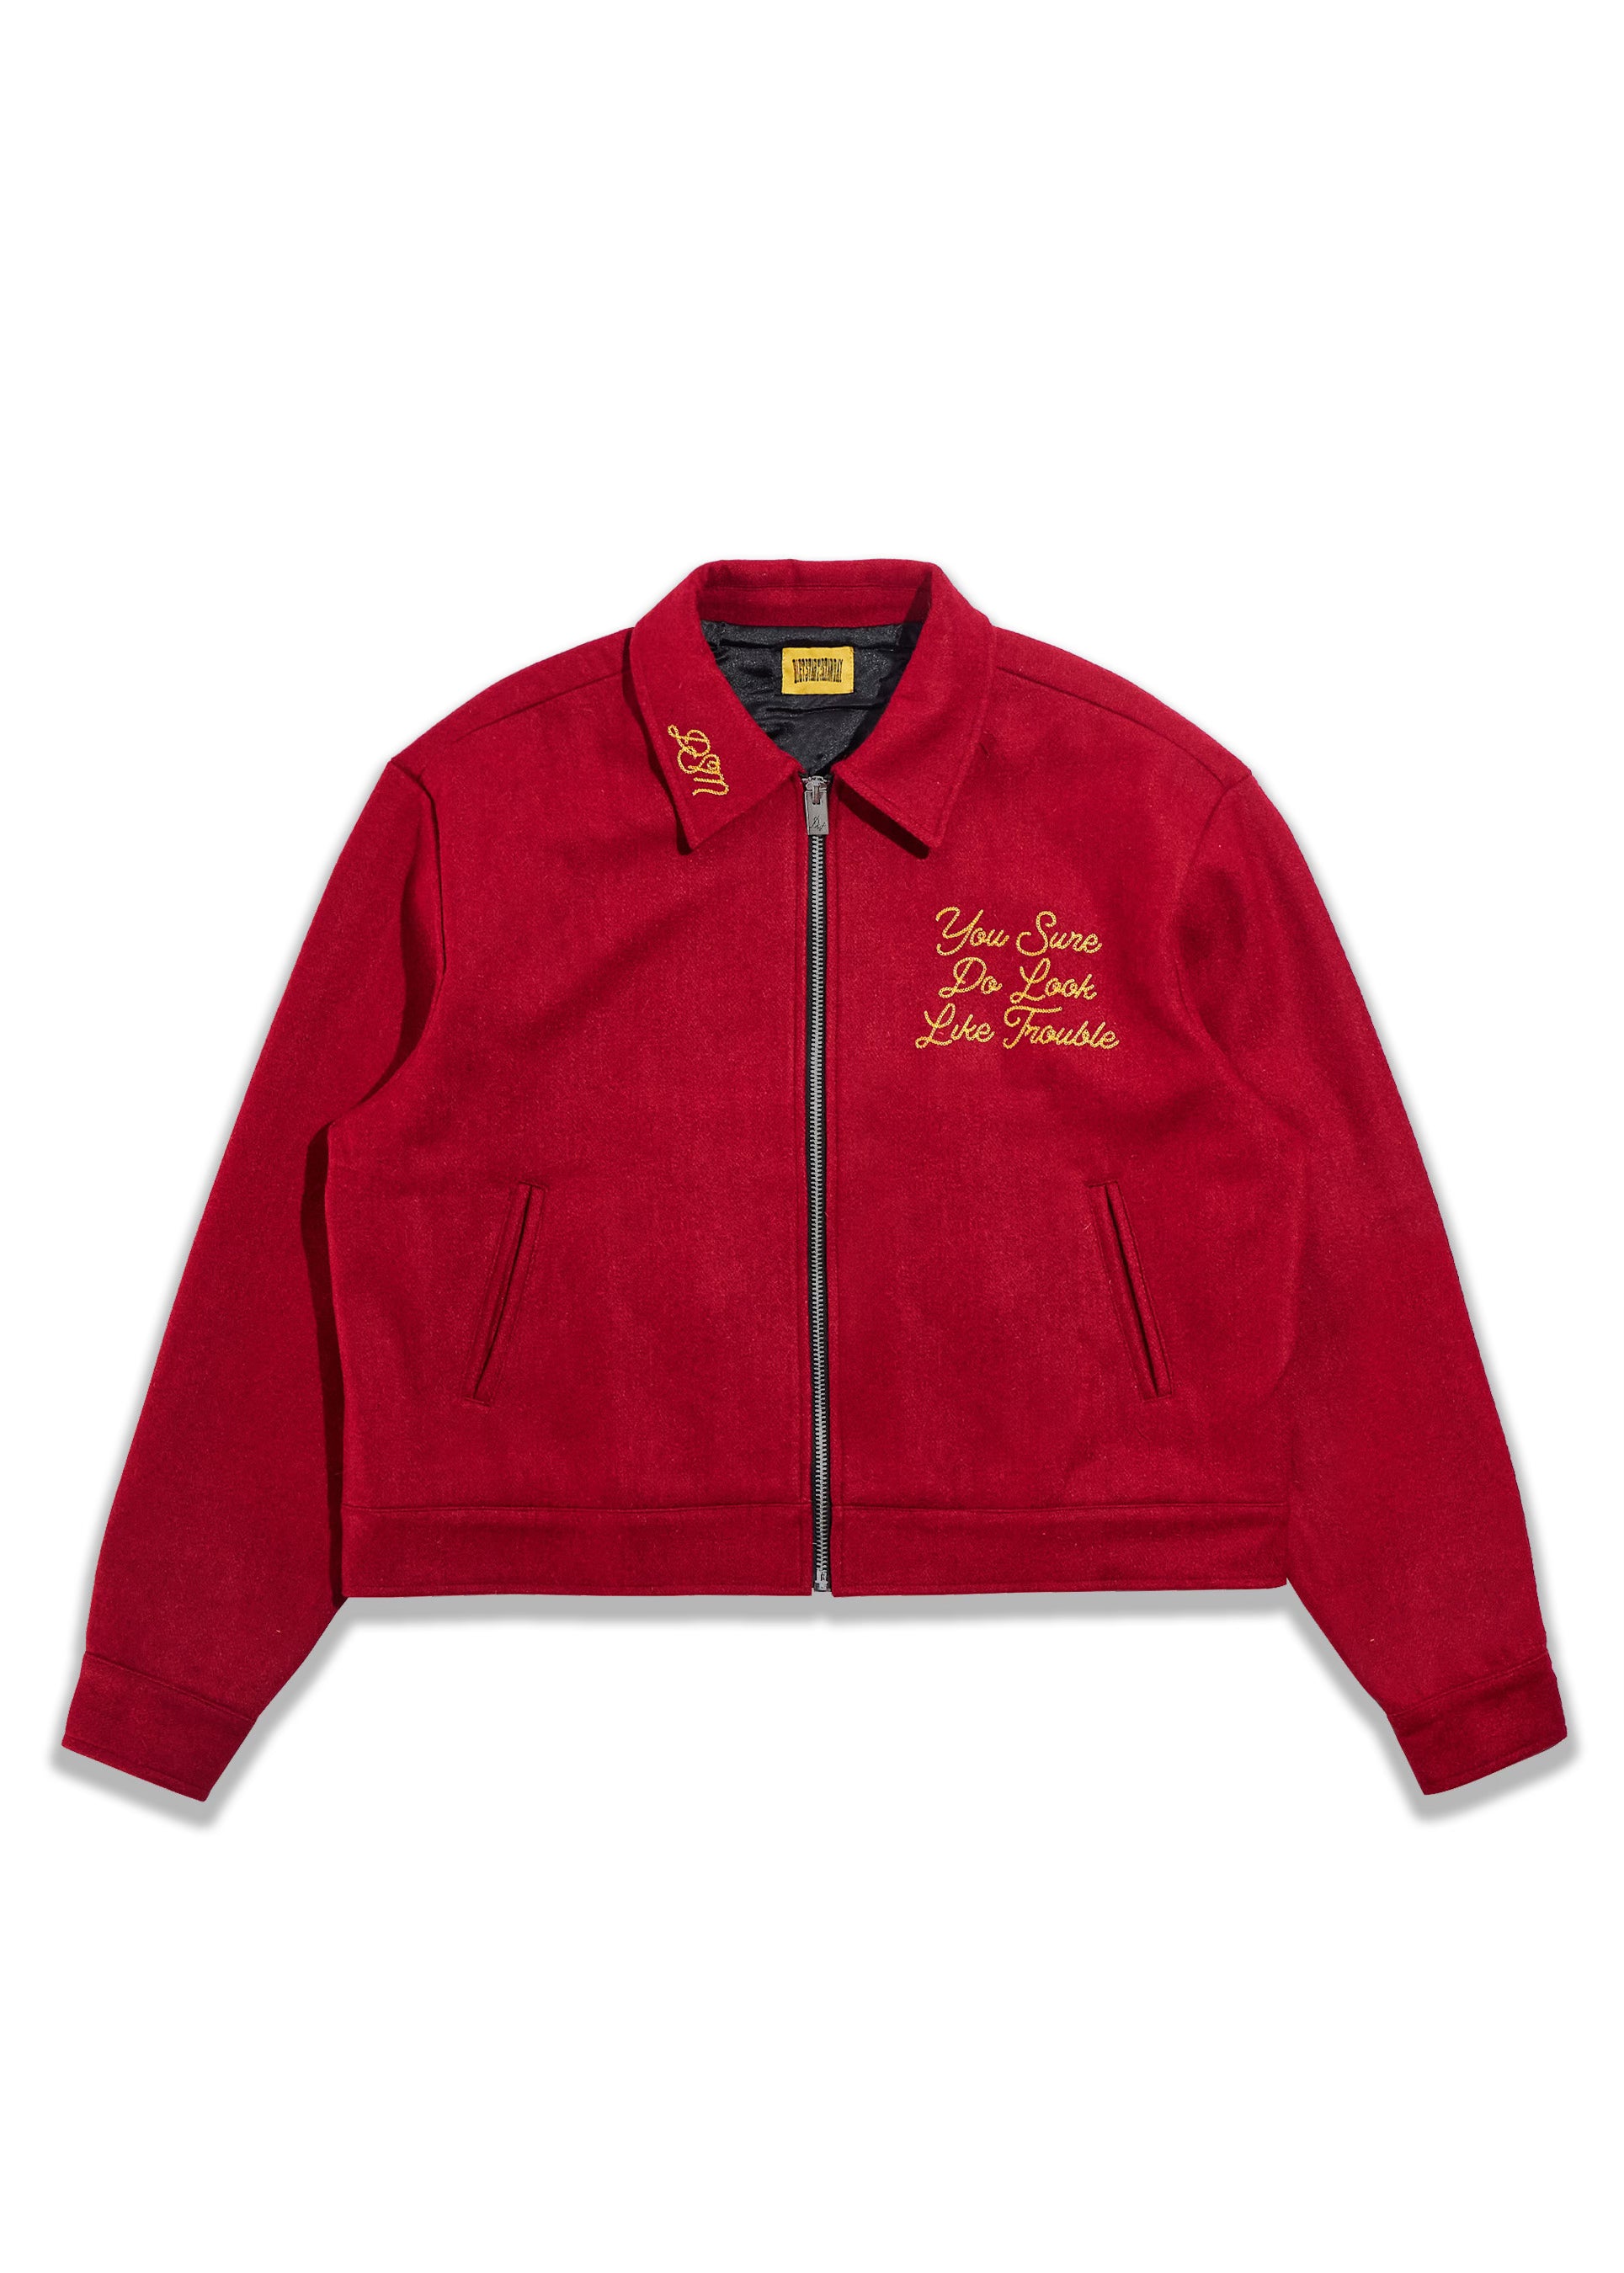 Trouble Jacket - Red